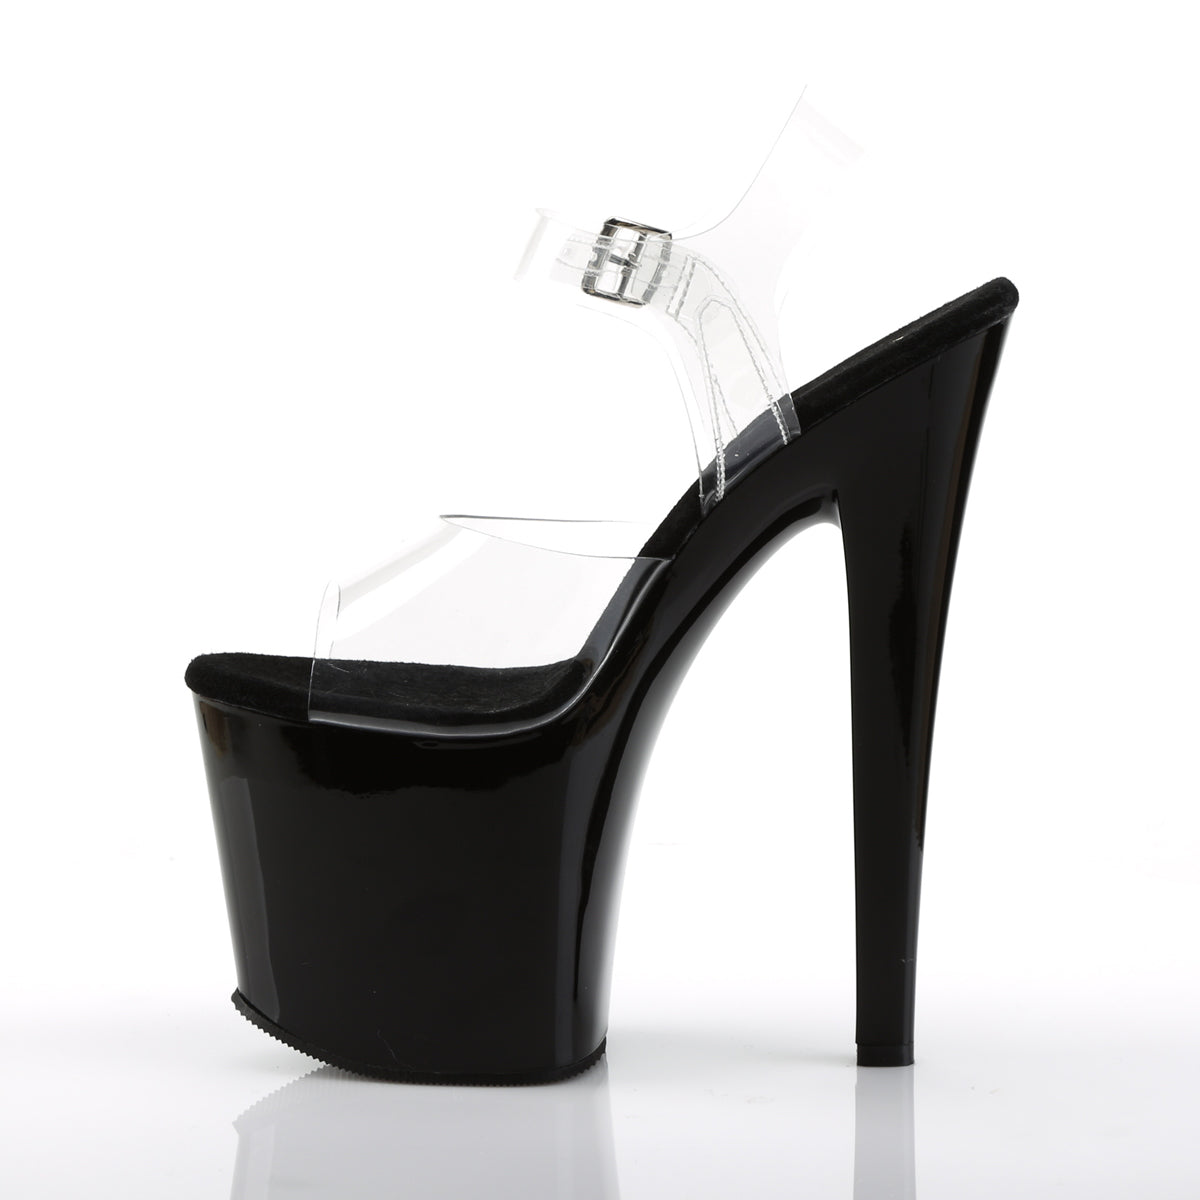 TABOO-708 7.5" Heel Clear and Black Pole Dancing Platforms-Pleaser- Sexy Shoes Pole Dance Heels